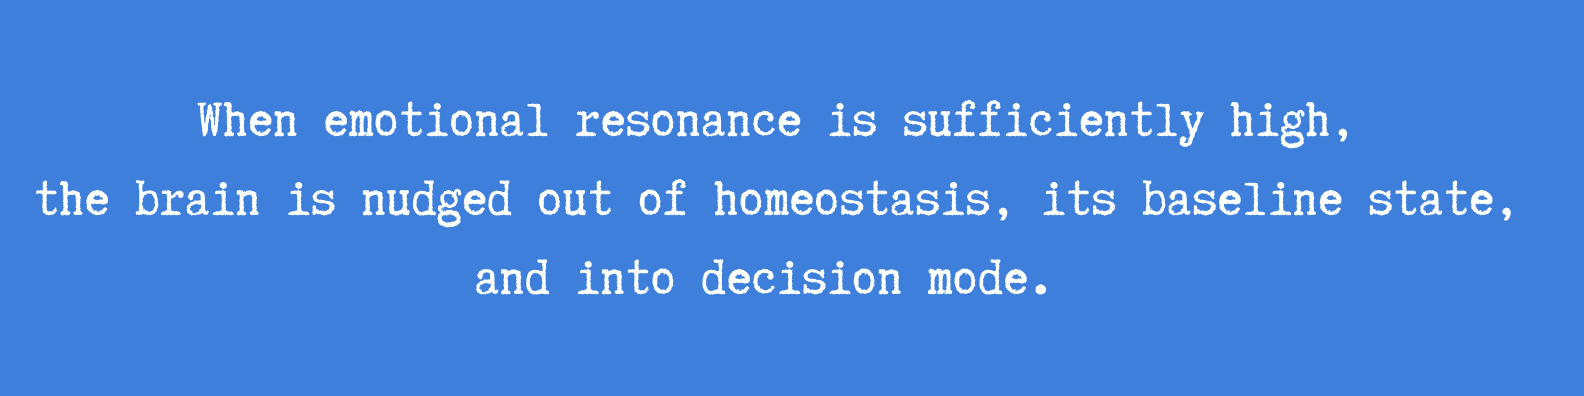 When emotional resonance is sufficiently high, the brain is nudged out of homeostasis, its baseline state, and into decision mode.